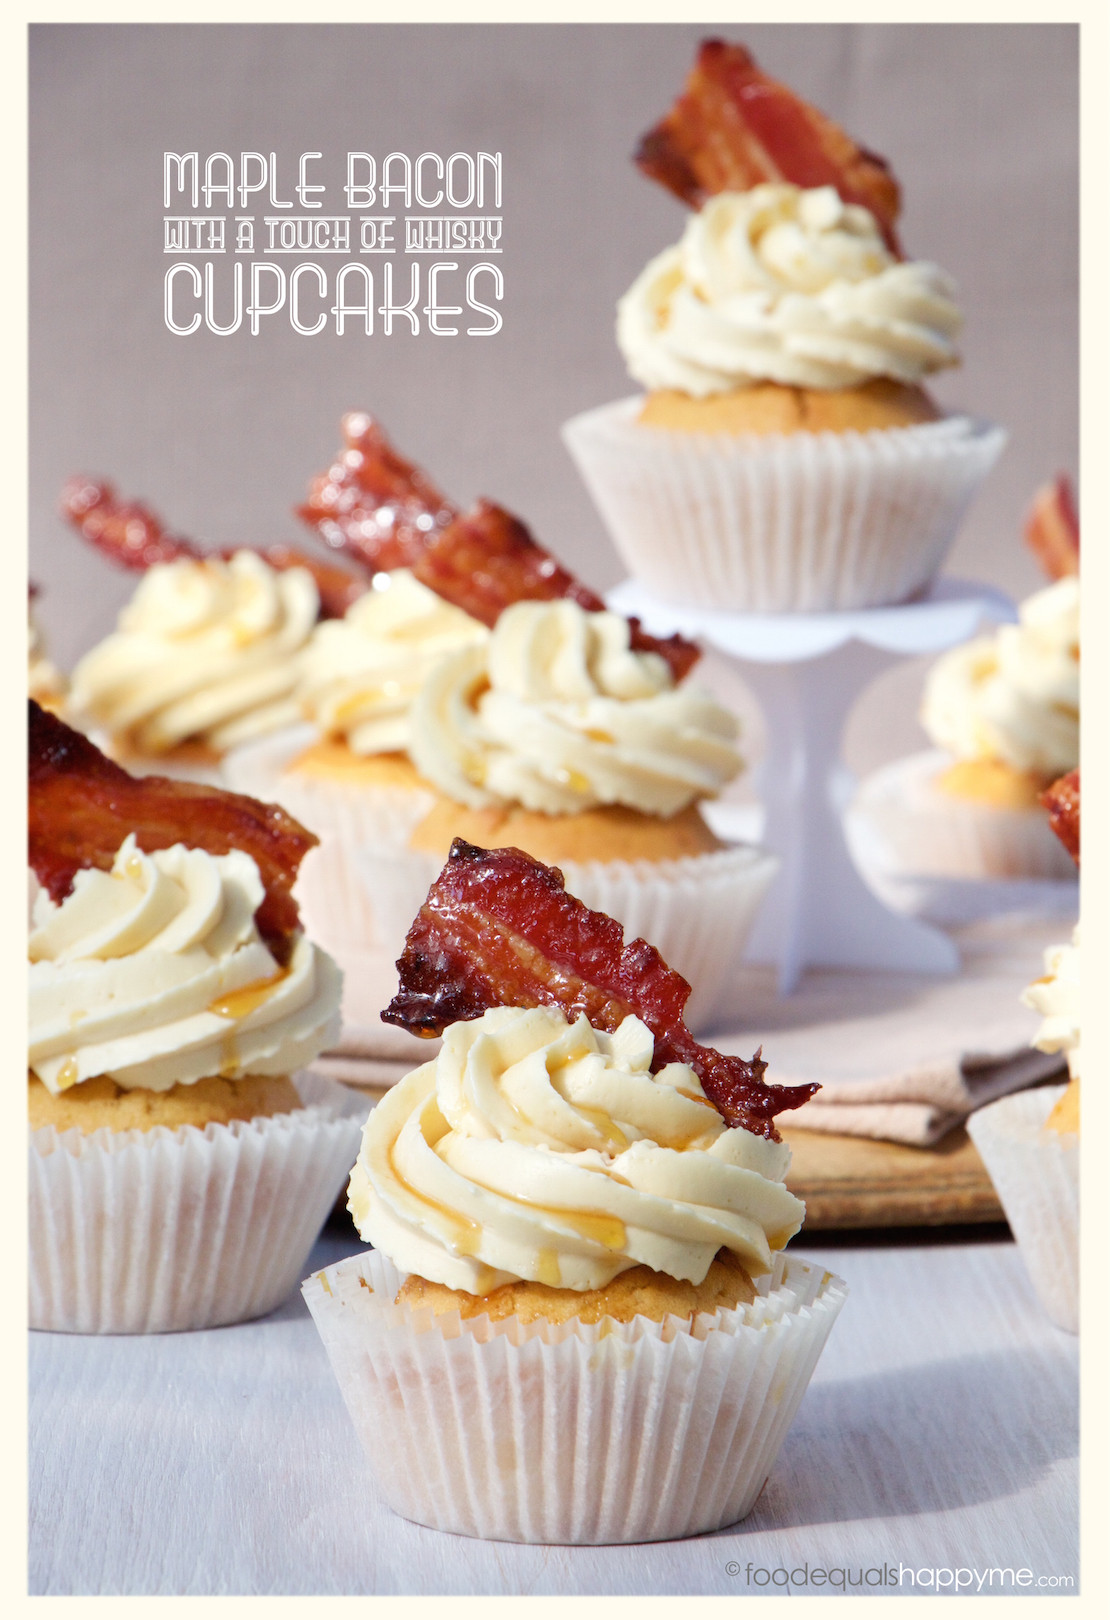 Maple Bacon Cupcakes
 Maple Bacon Cupcakes with a touch of whisky